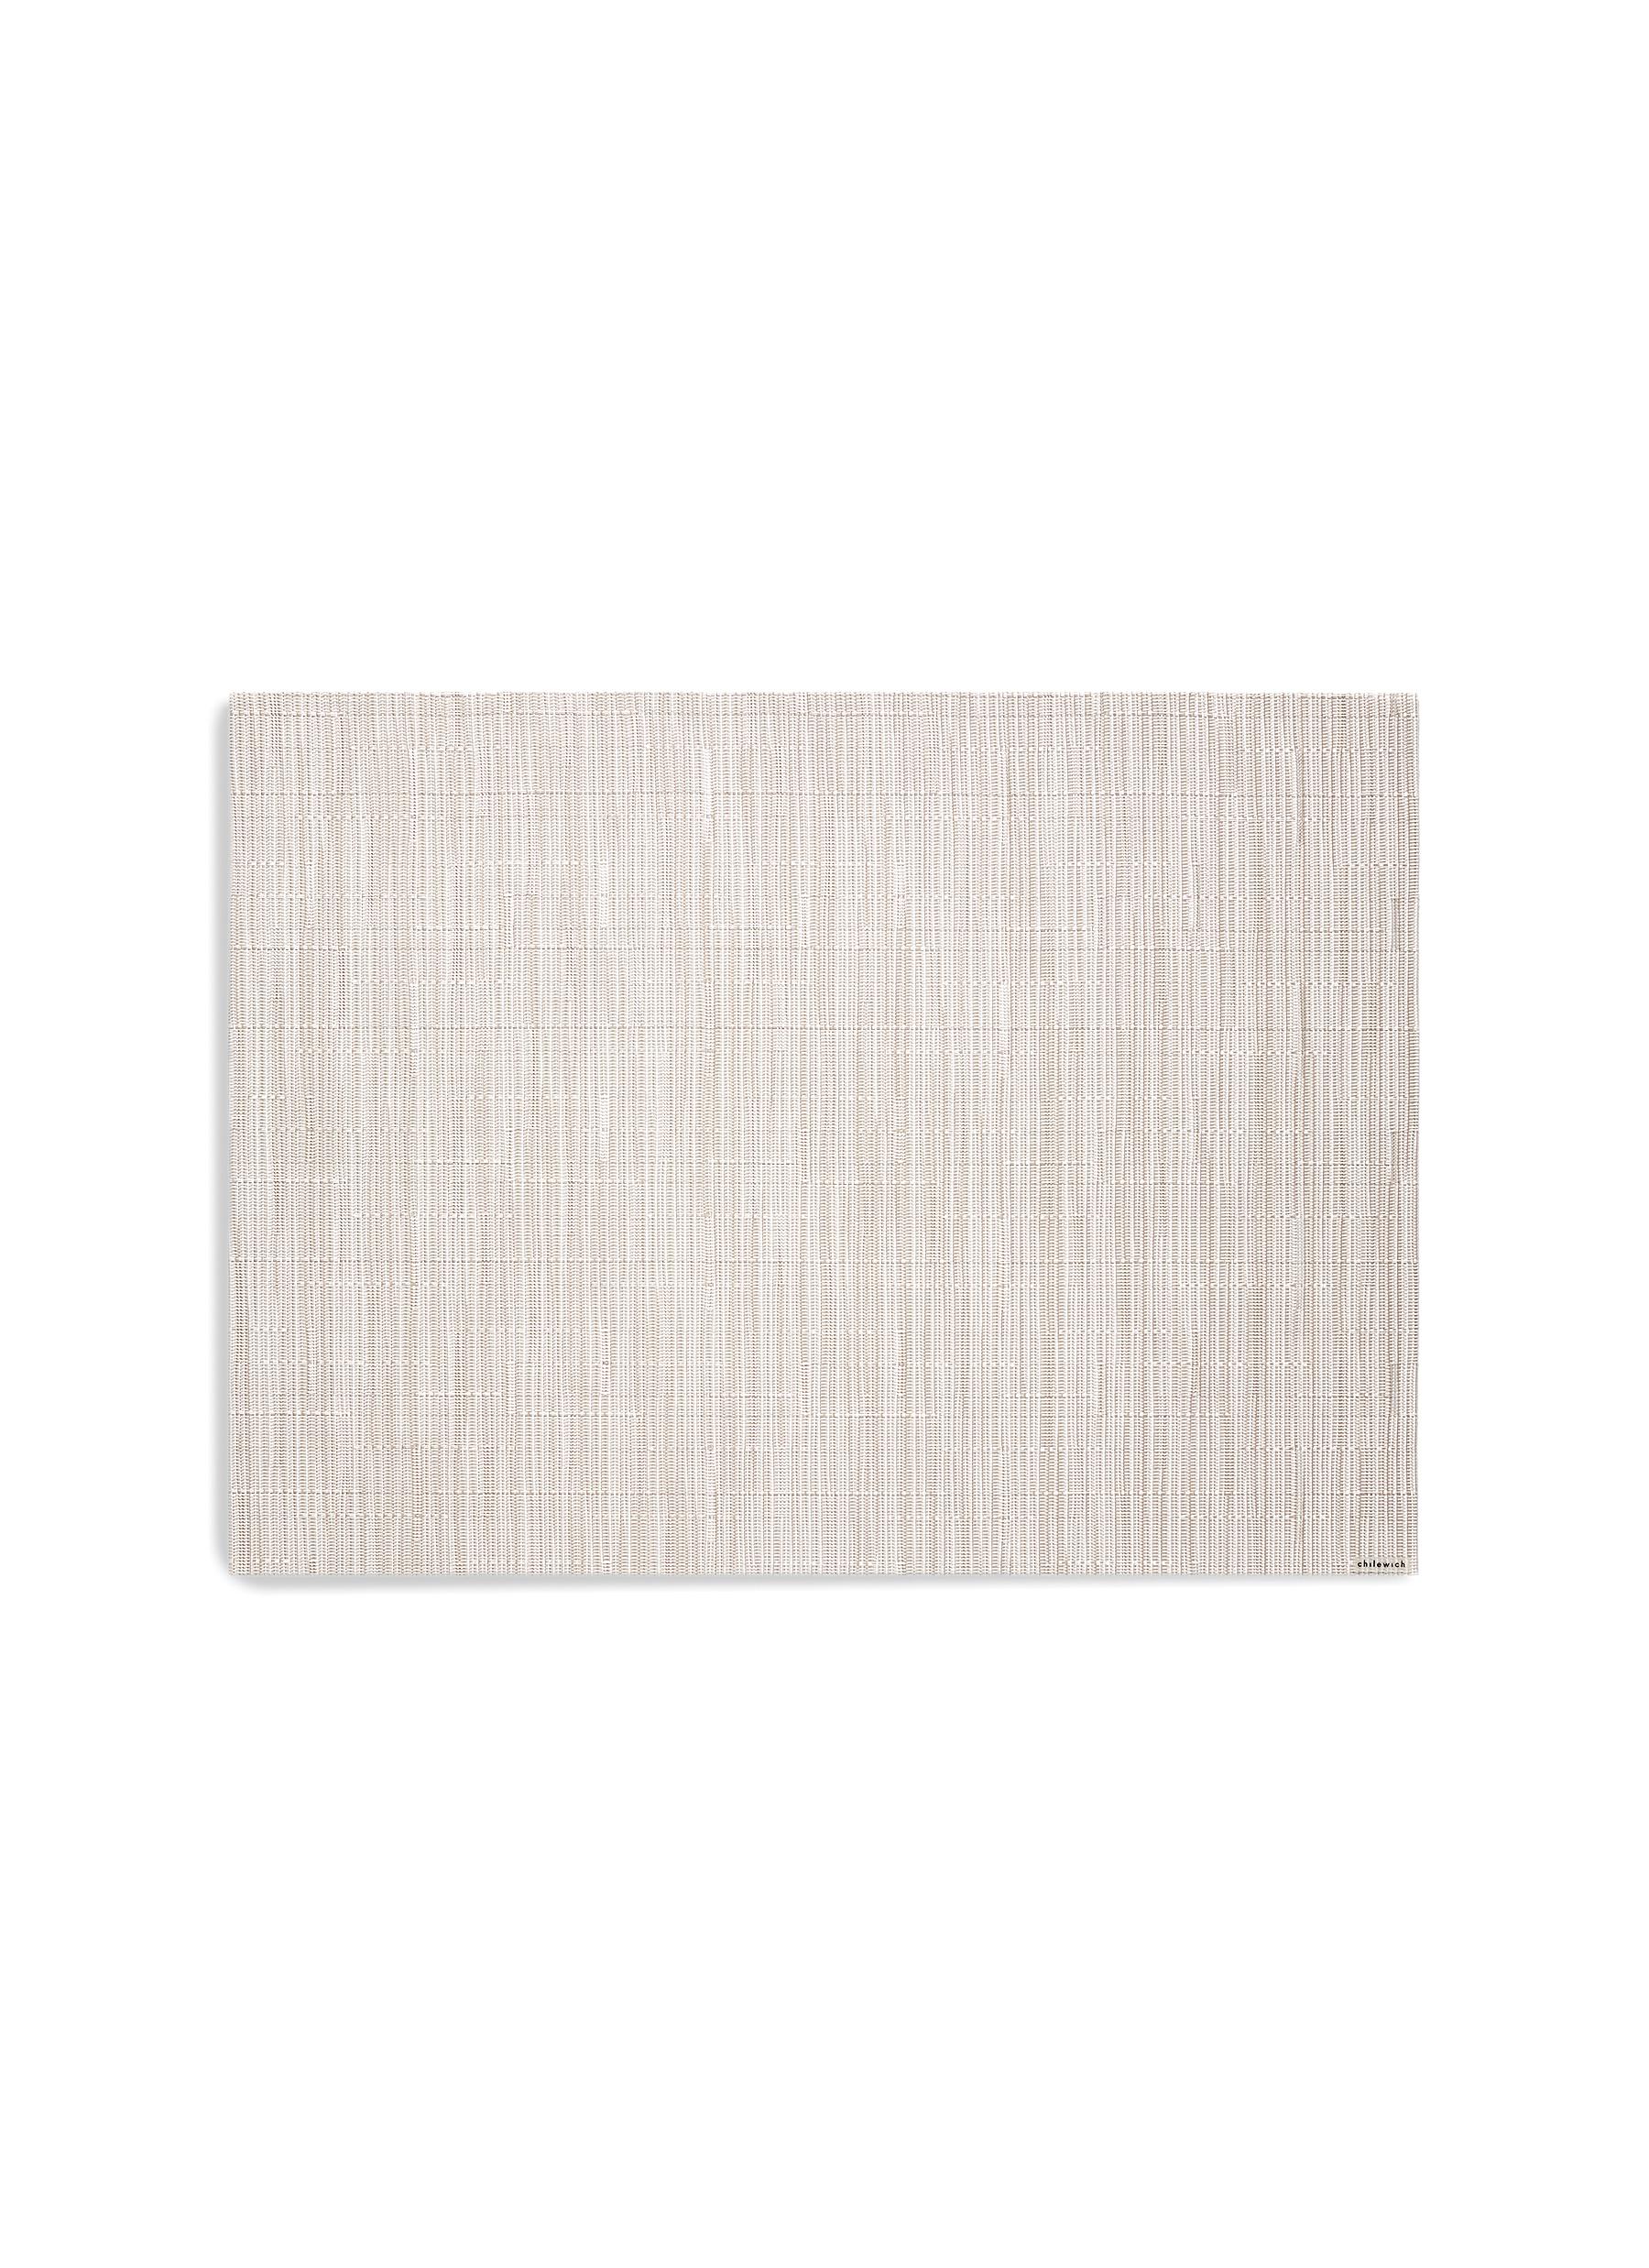 Bamboo Rectangle Placemat - Coconut